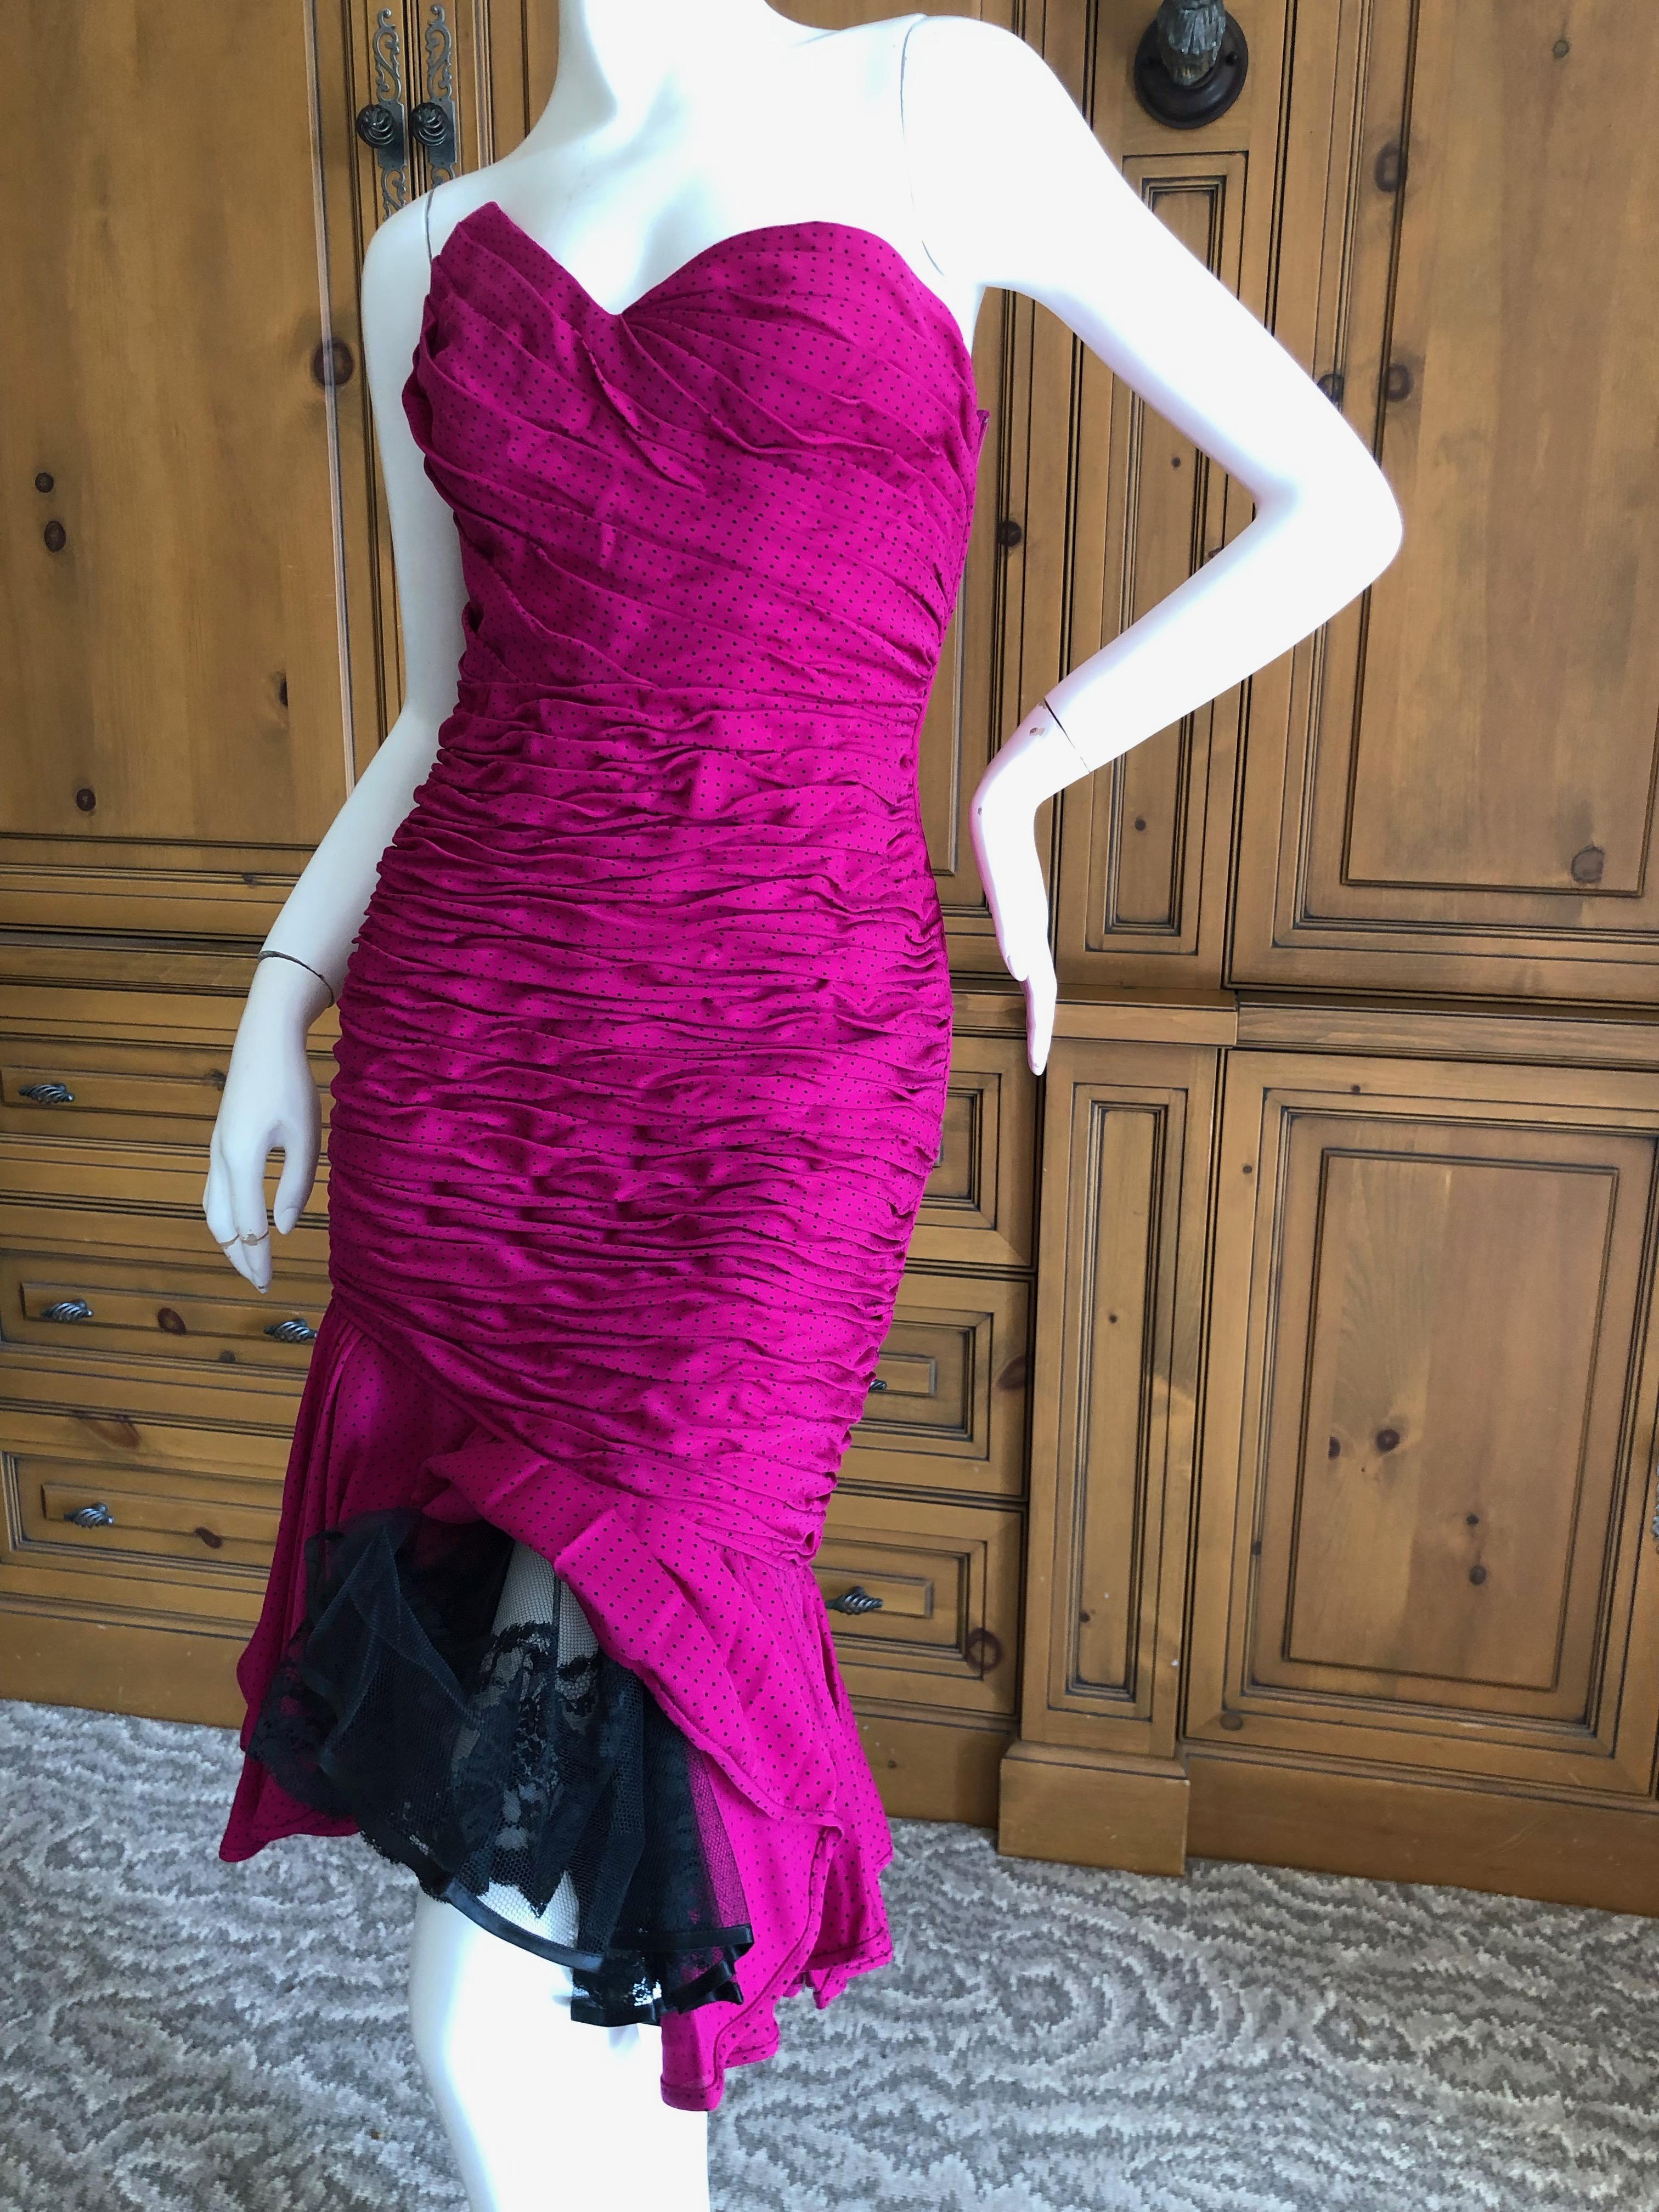 Women's Emanuel Ungaro Parallel Fall 1984 Shirred Strapless Evening Dress w Lace Hem For Sale